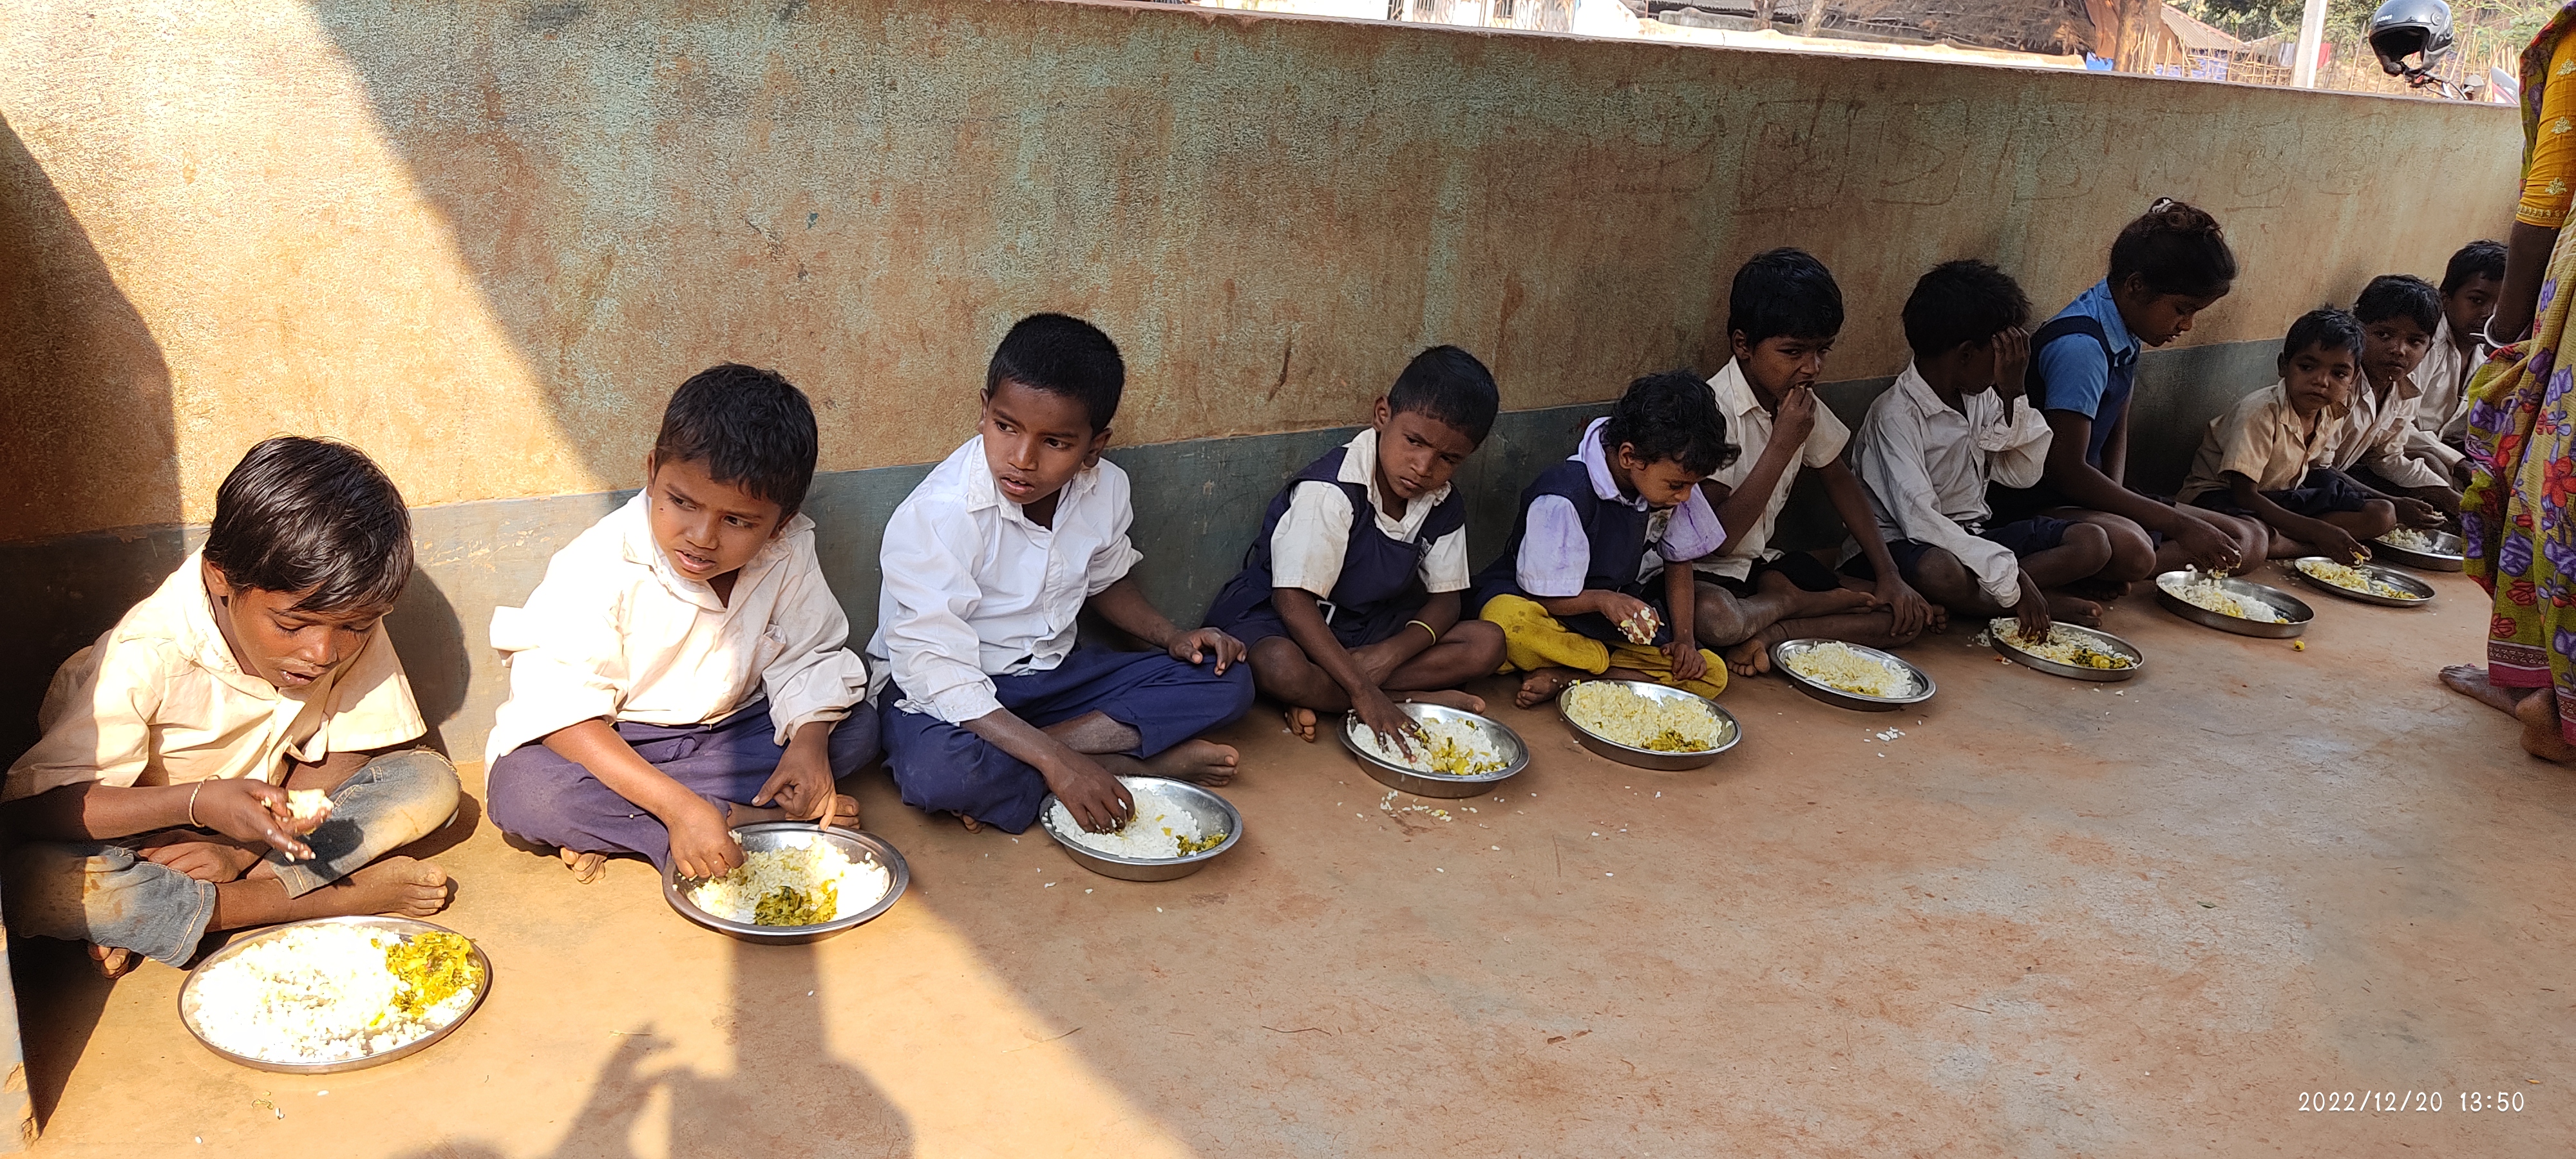 Does This Photo Show A Mid-Day Meal In Uttar Pradesh? A FactCheck | BOOM